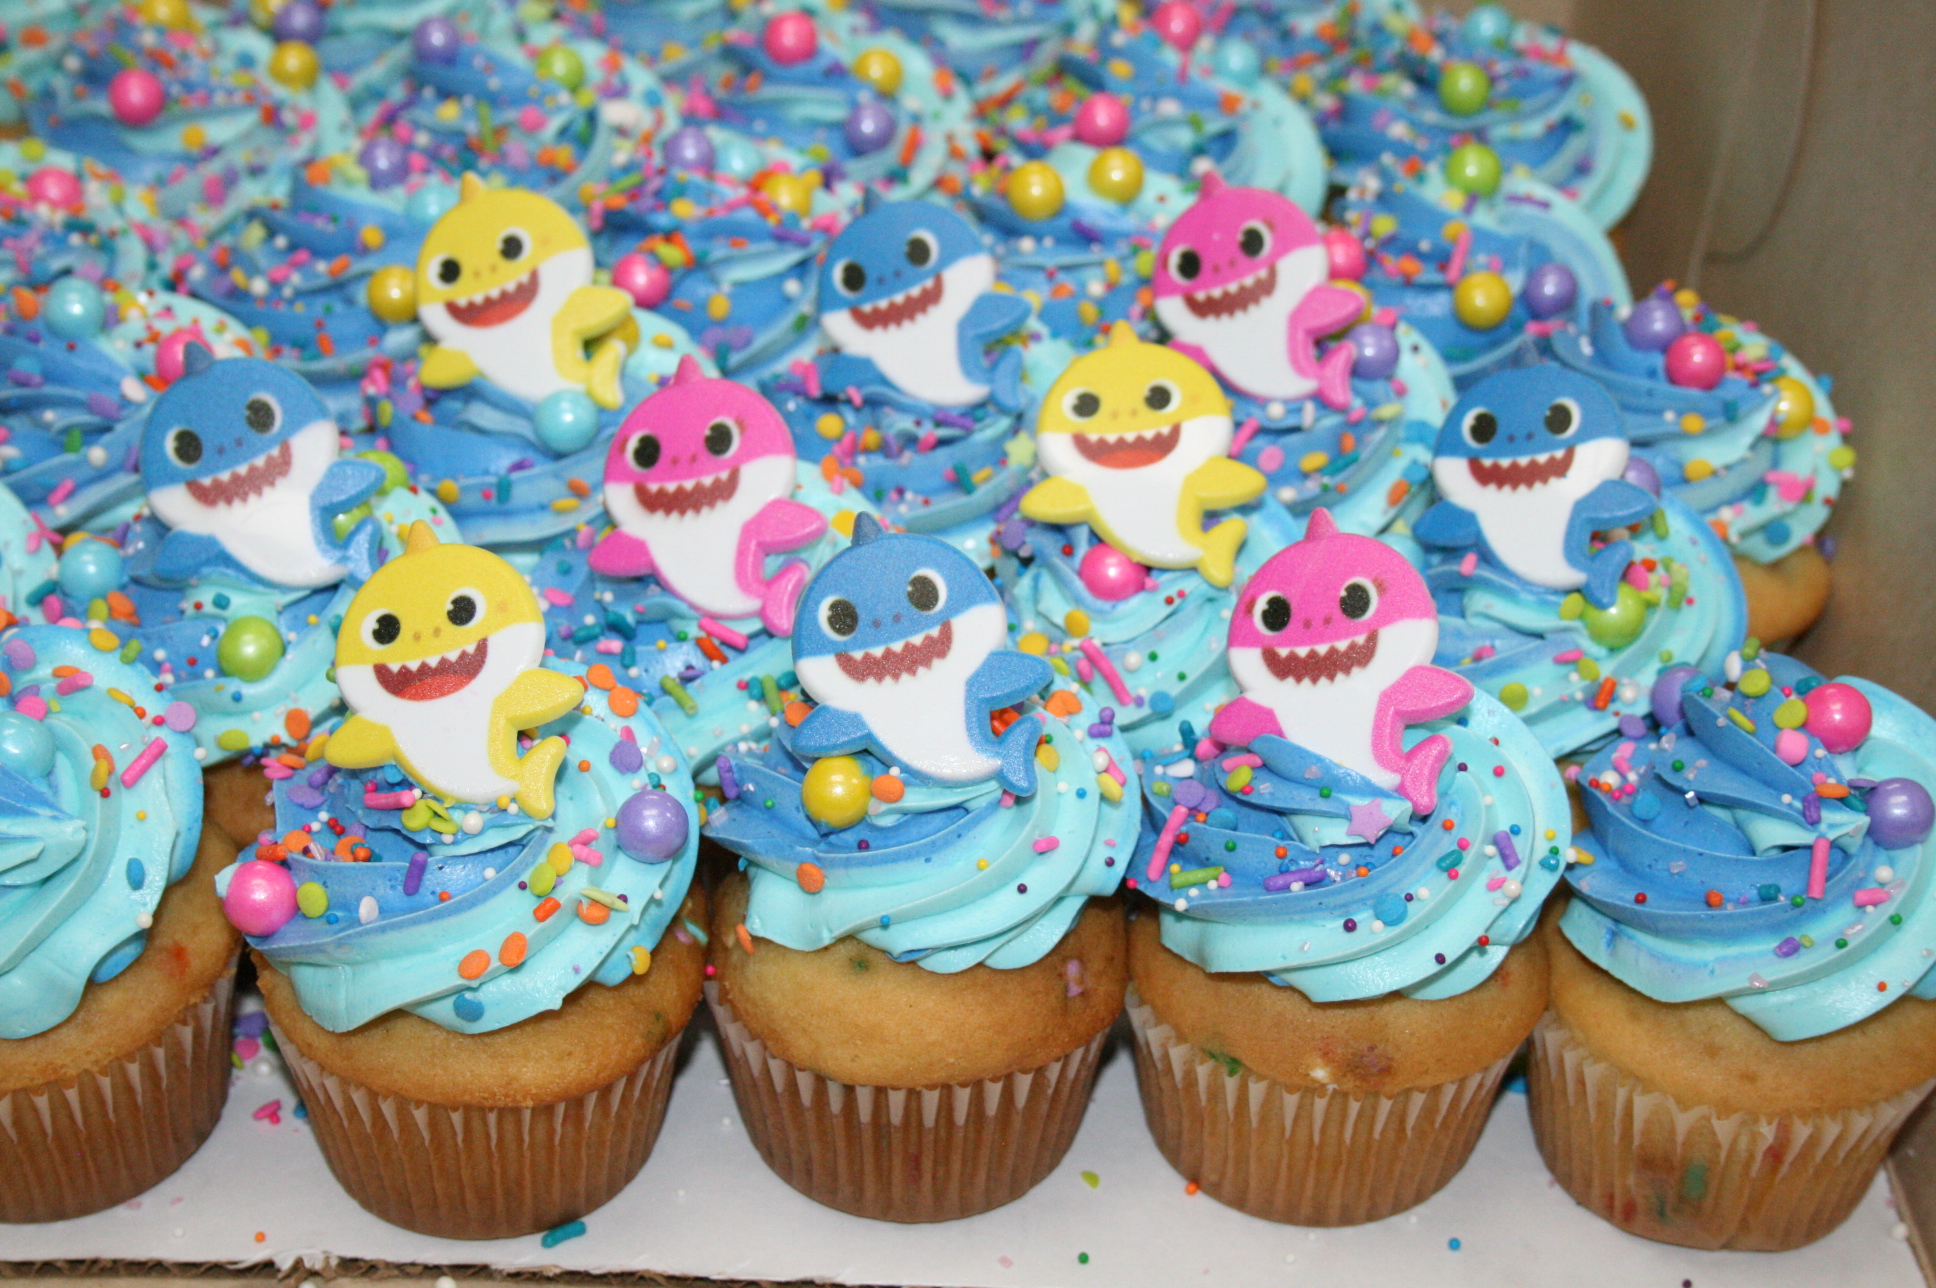 Home | Sweet Baby Cakes Cupcakes